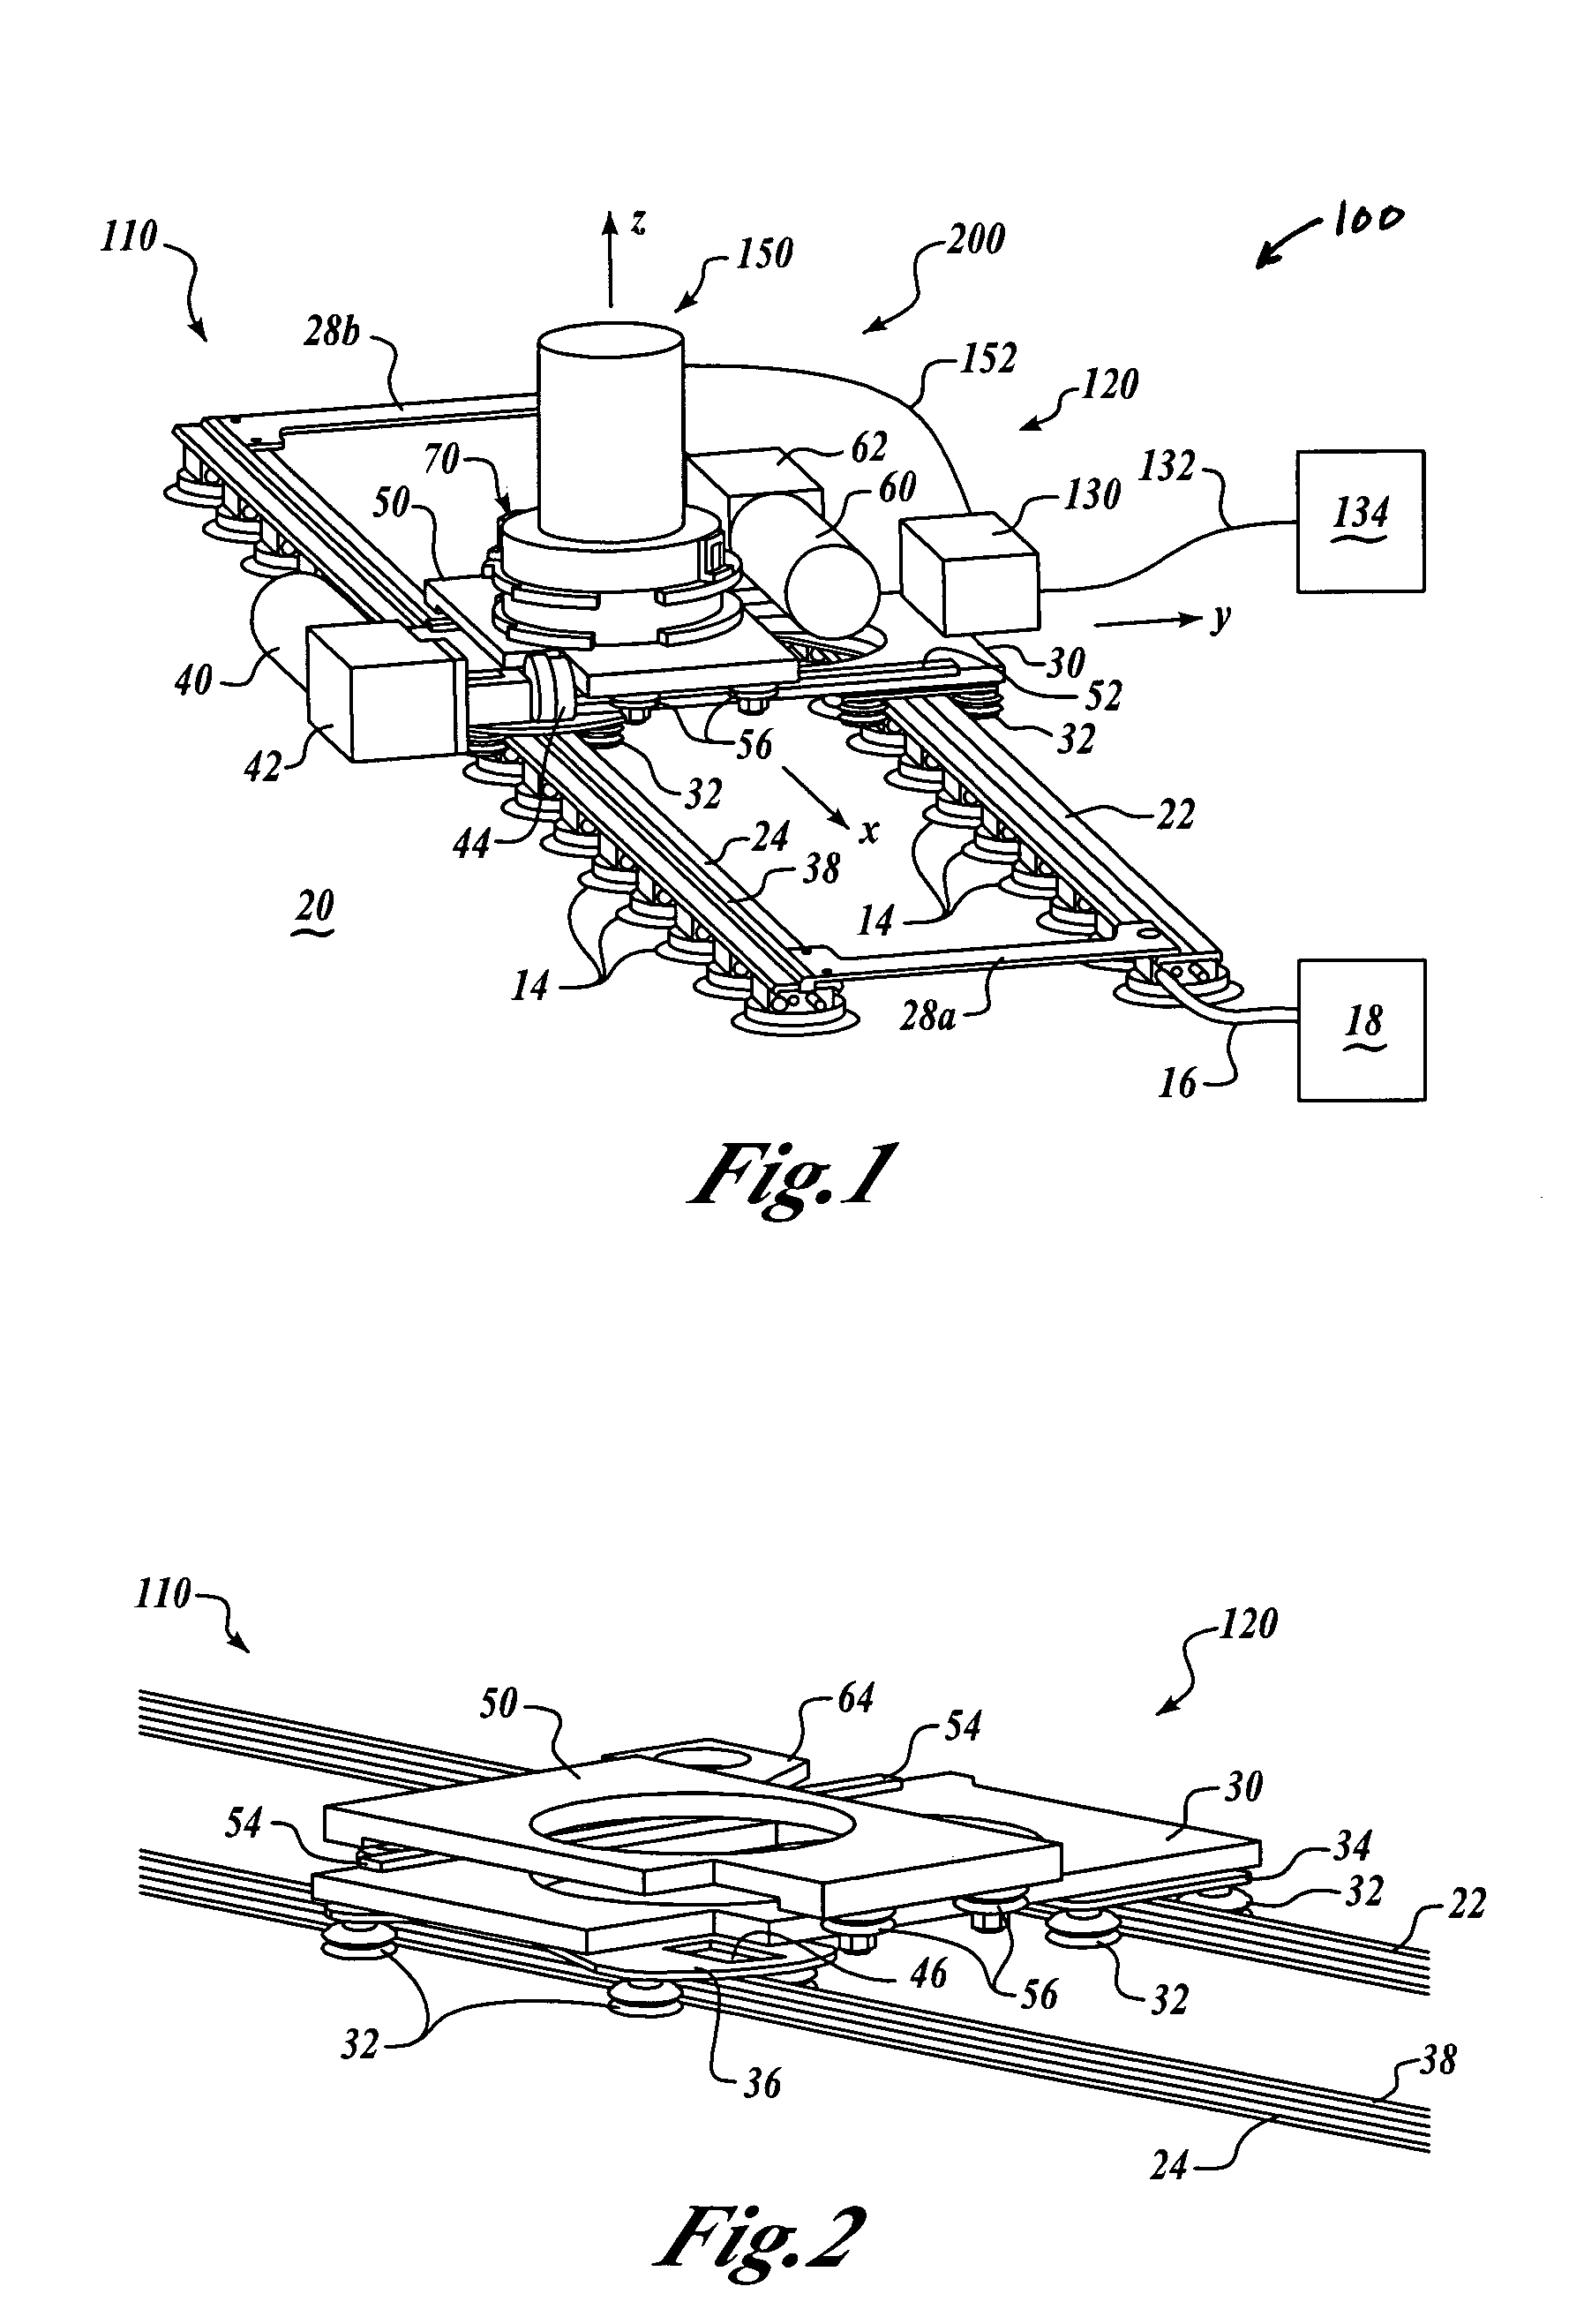 Apparatus and methods for servo-controlled manufacturing operations